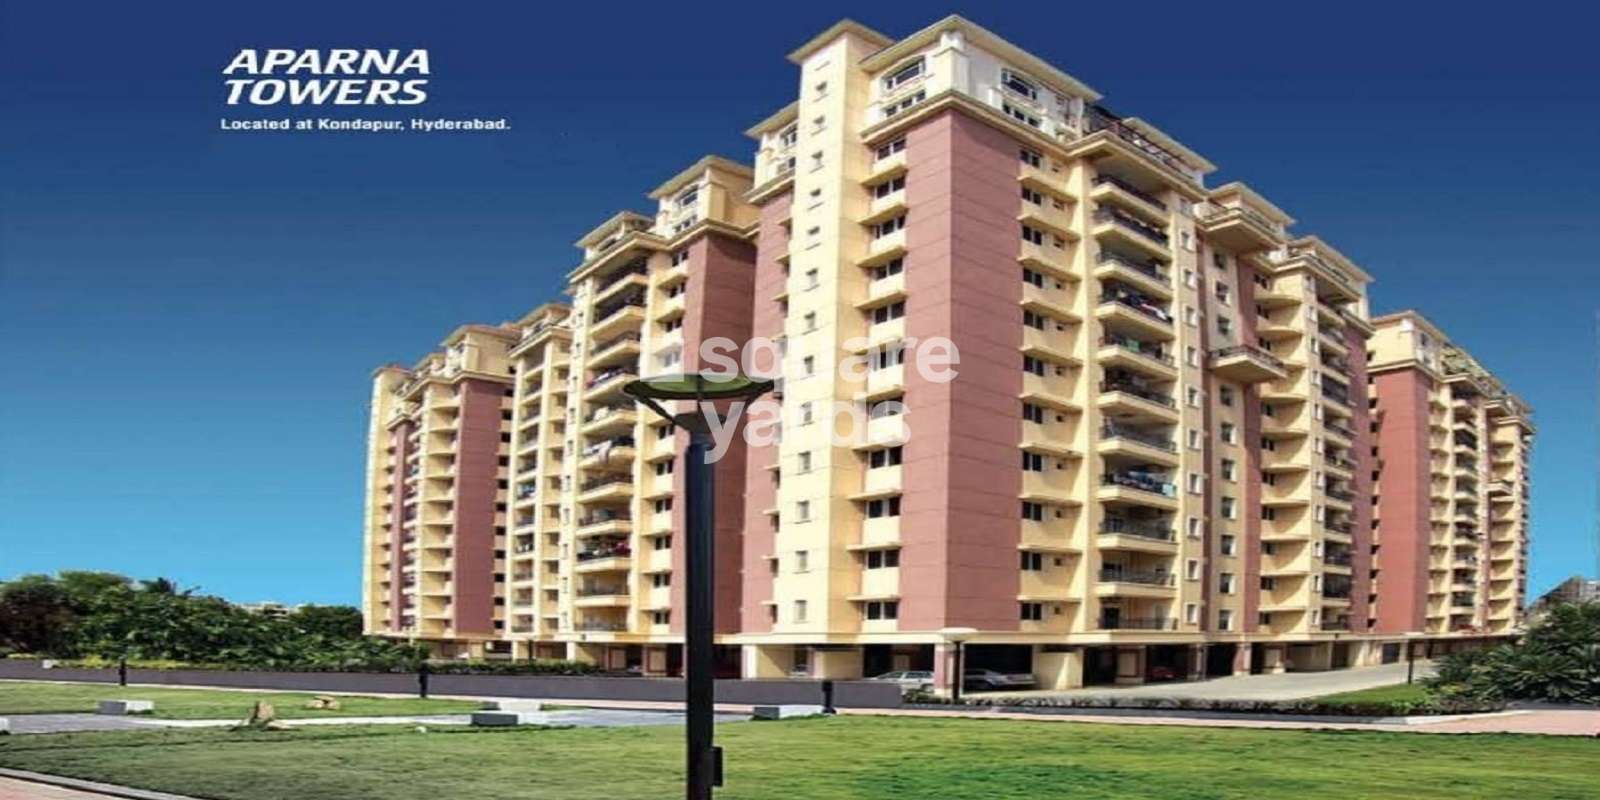 Aparna Towers Cover Image